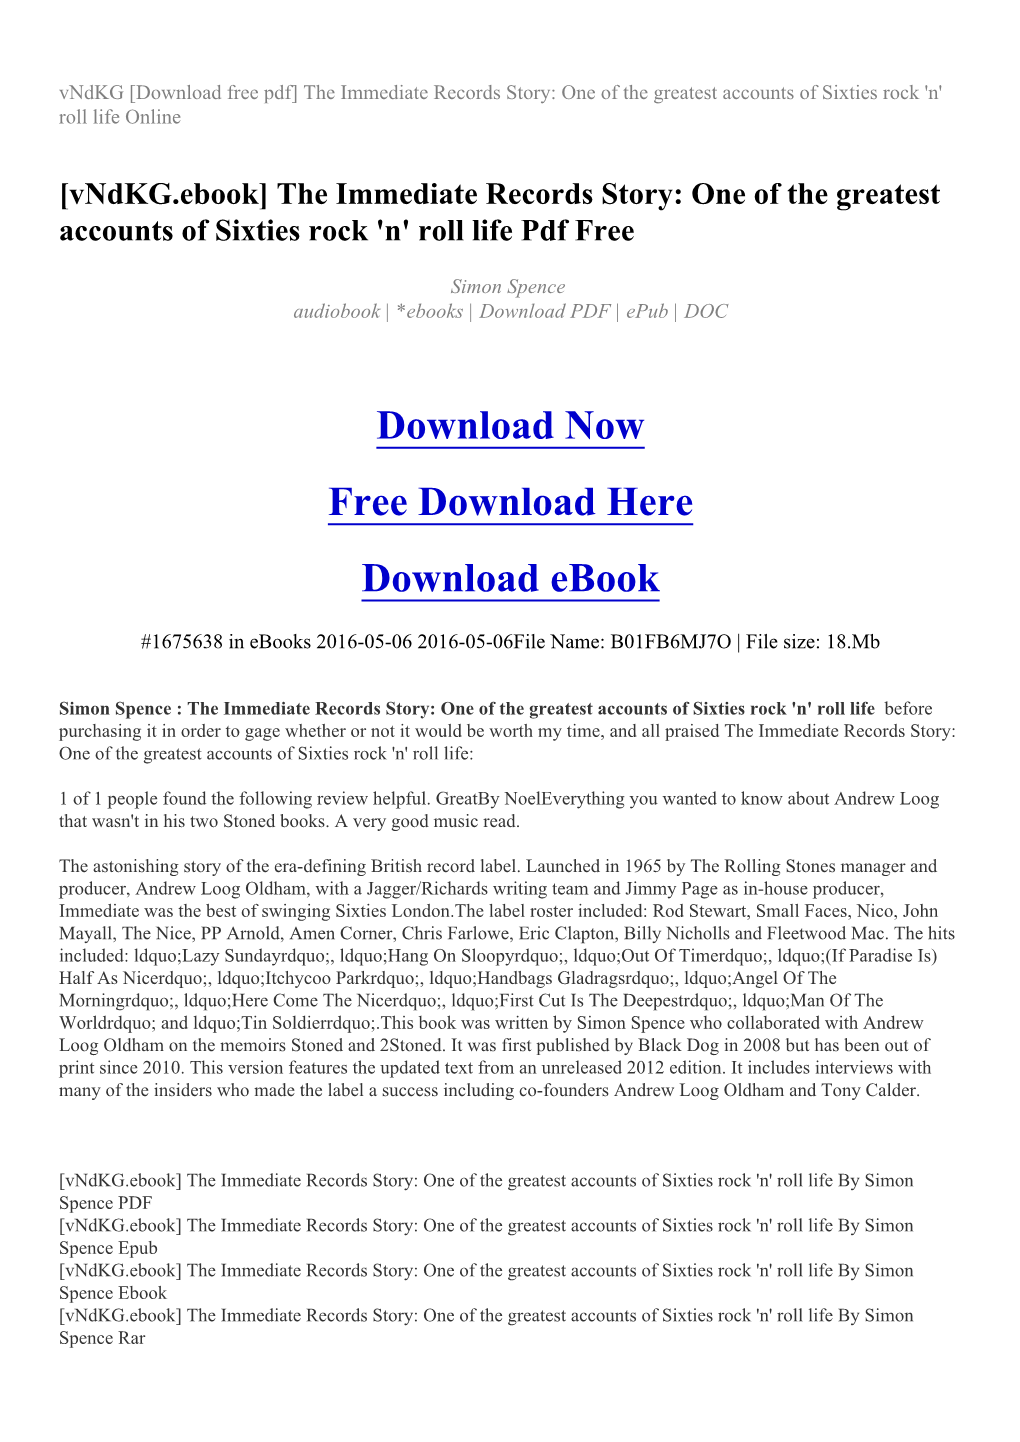 Vndkg [Download Free Pdf] the Immediate Records Story: One of the Greatest Accounts of Sixties Rock 'N' Roll Life Online